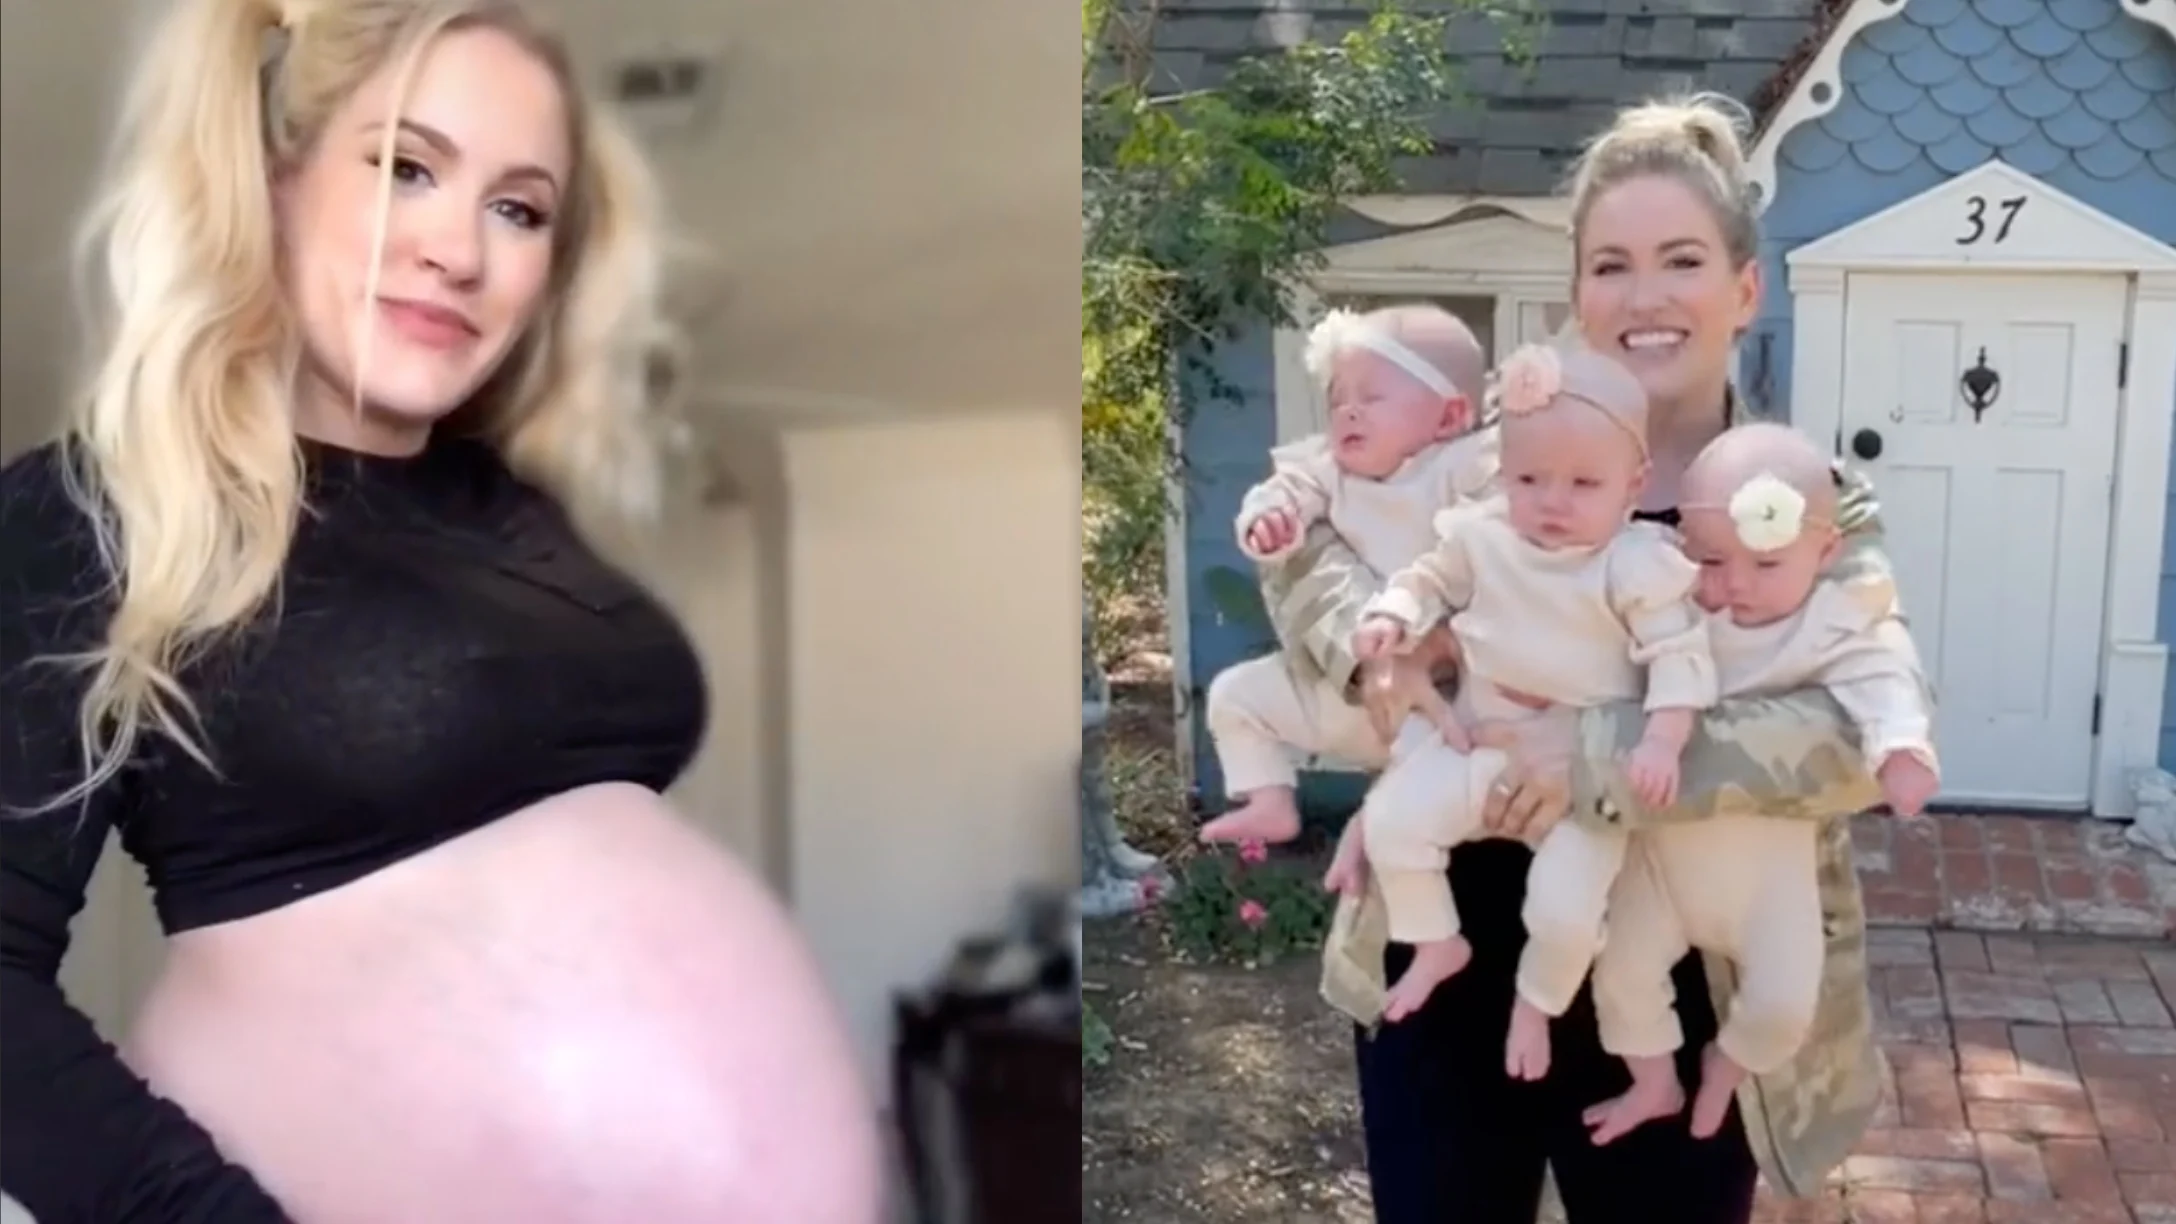 Mom Made a Video Comparing Pregnancies With Twins and One Baby